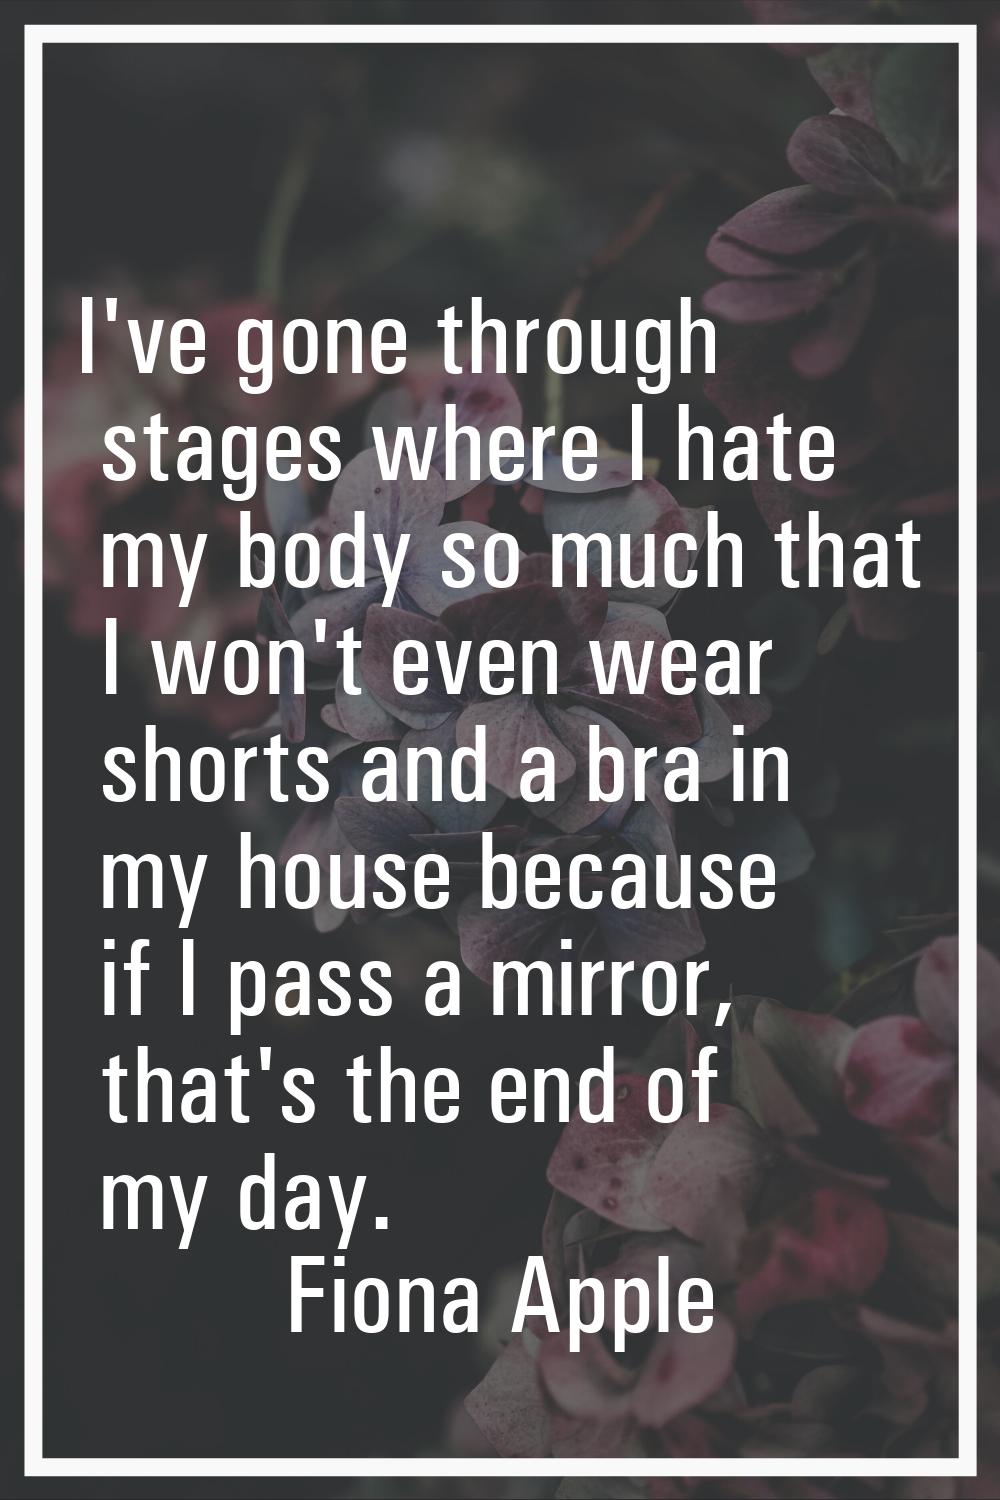 I've gone through stages where I hate my body so much that I won't even wear shorts and a bra in my